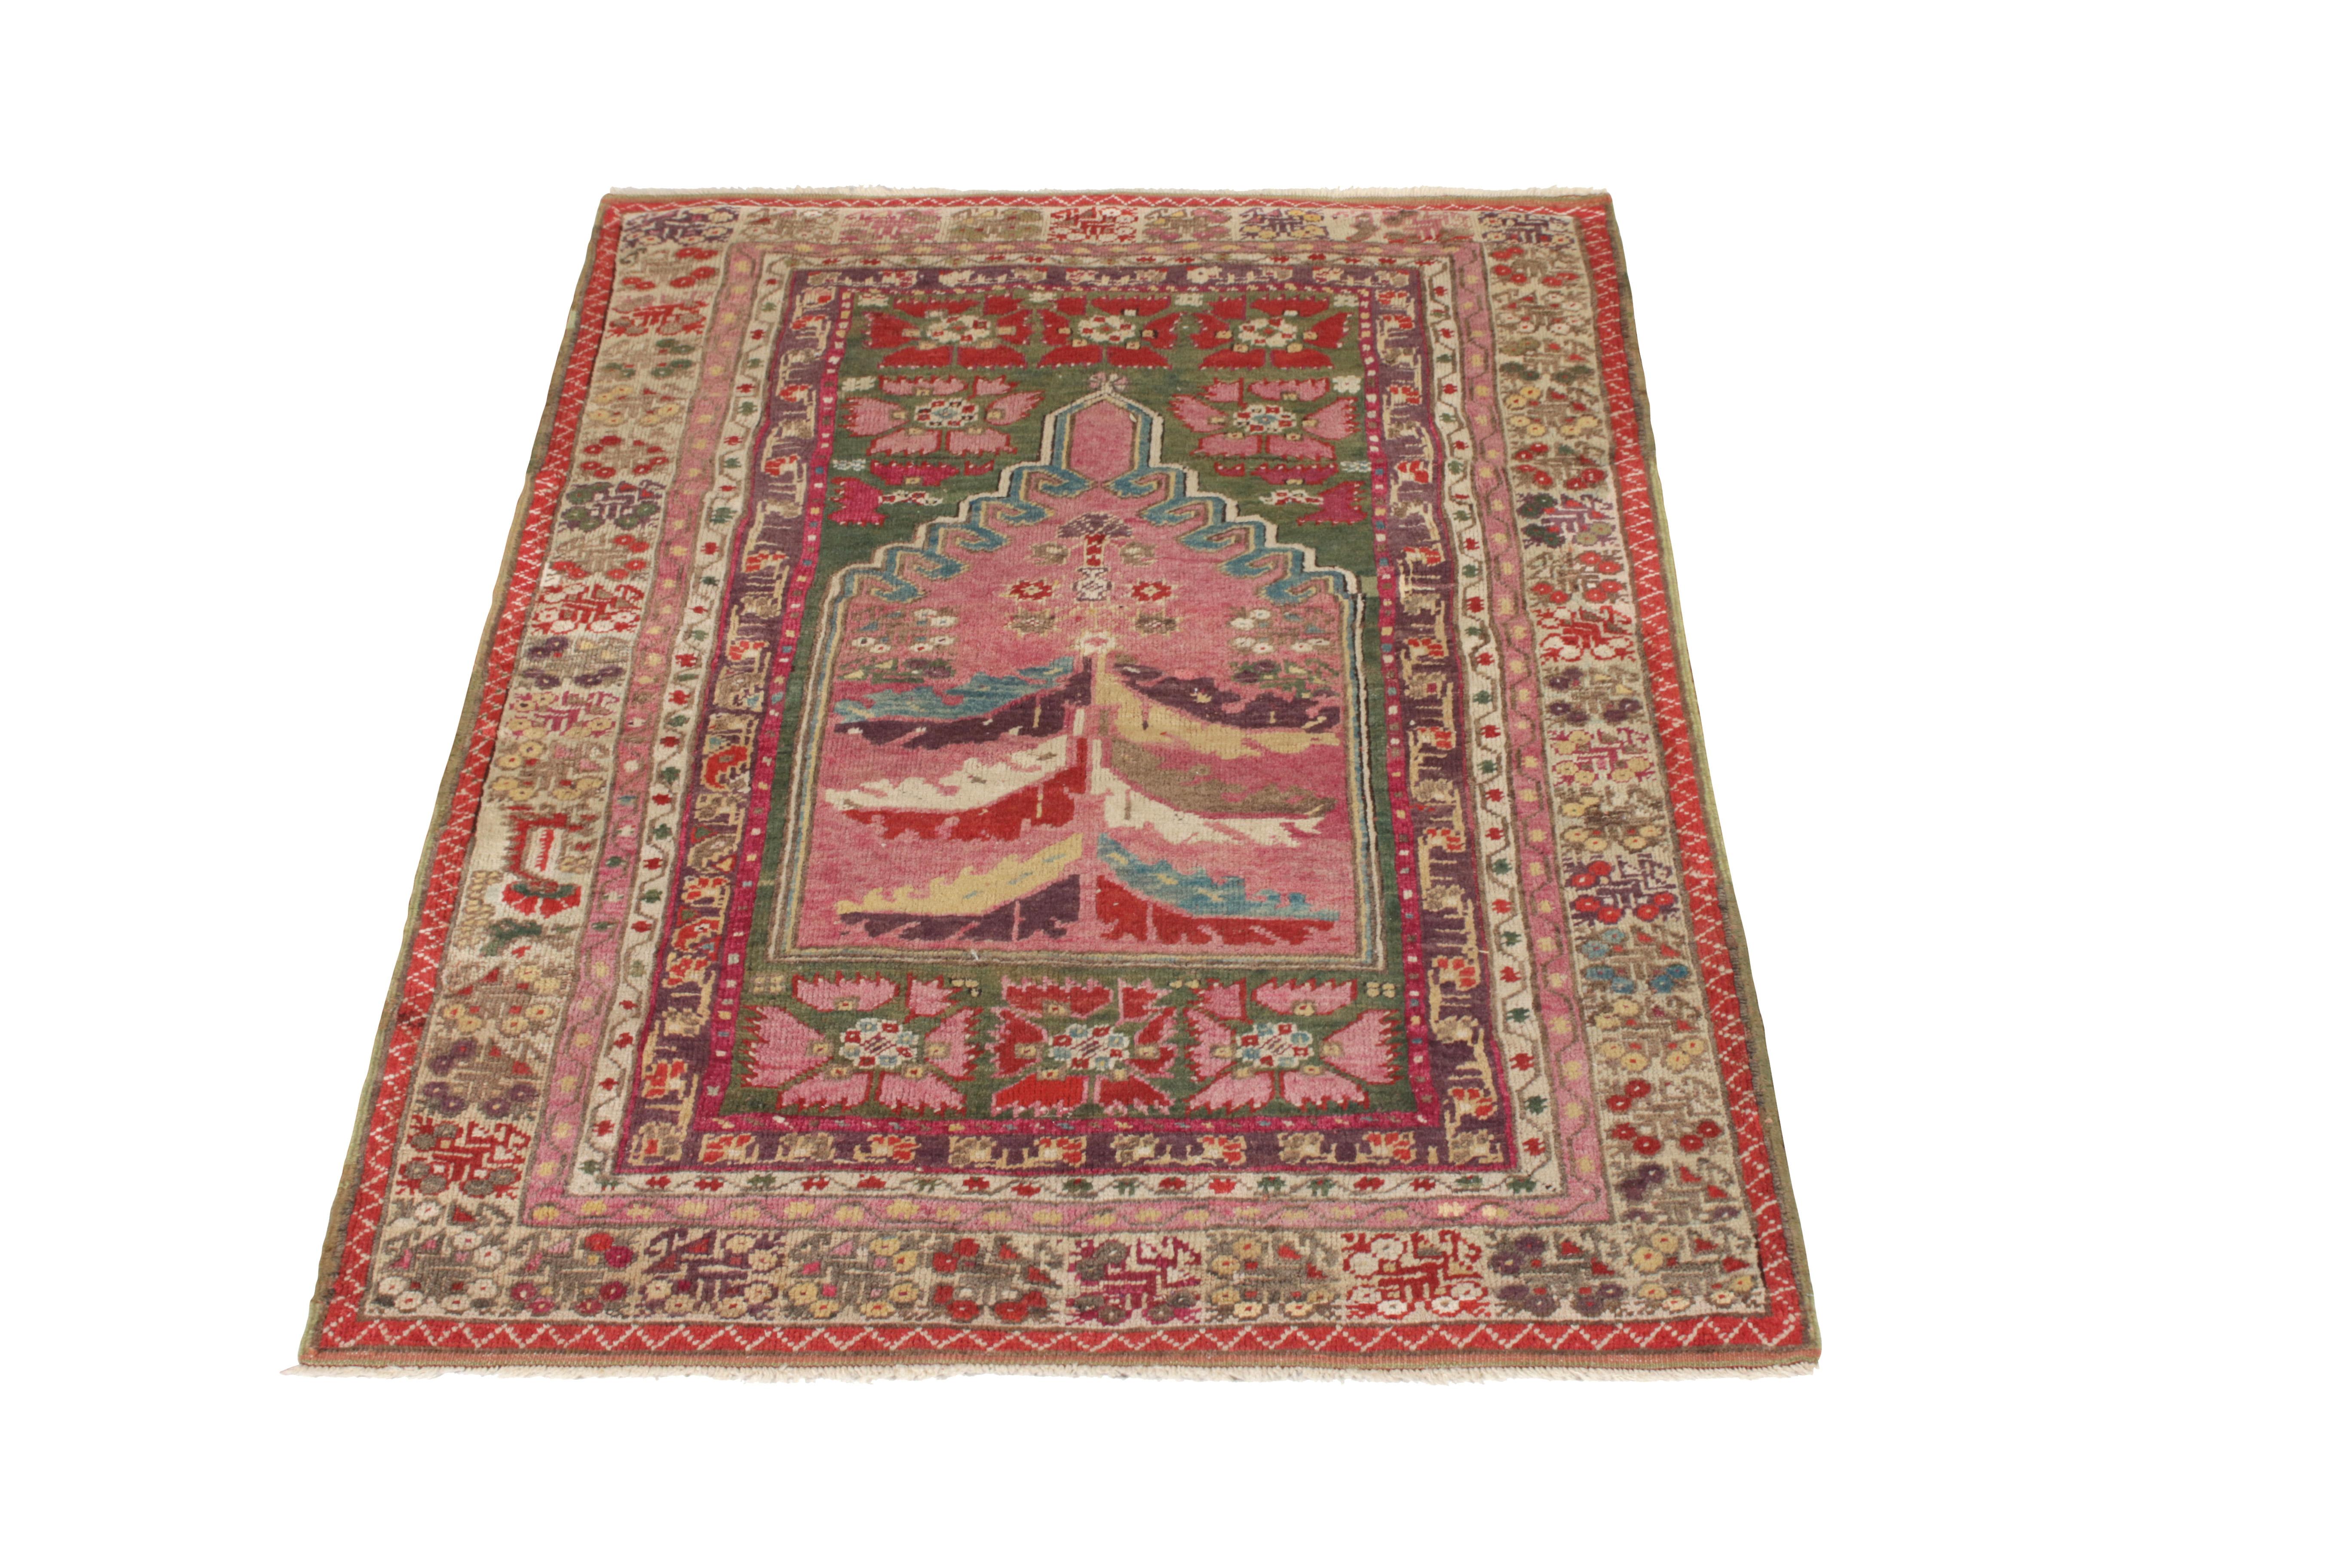 Hand-knotted in wool originating from Turkey circa 1880-1890, this 3 x 5 rug is a handmade antique Anatolian rug featuring an uncommon geometric floral pattern and a wide array of unique colorways seldom seen in this good condition.

On the